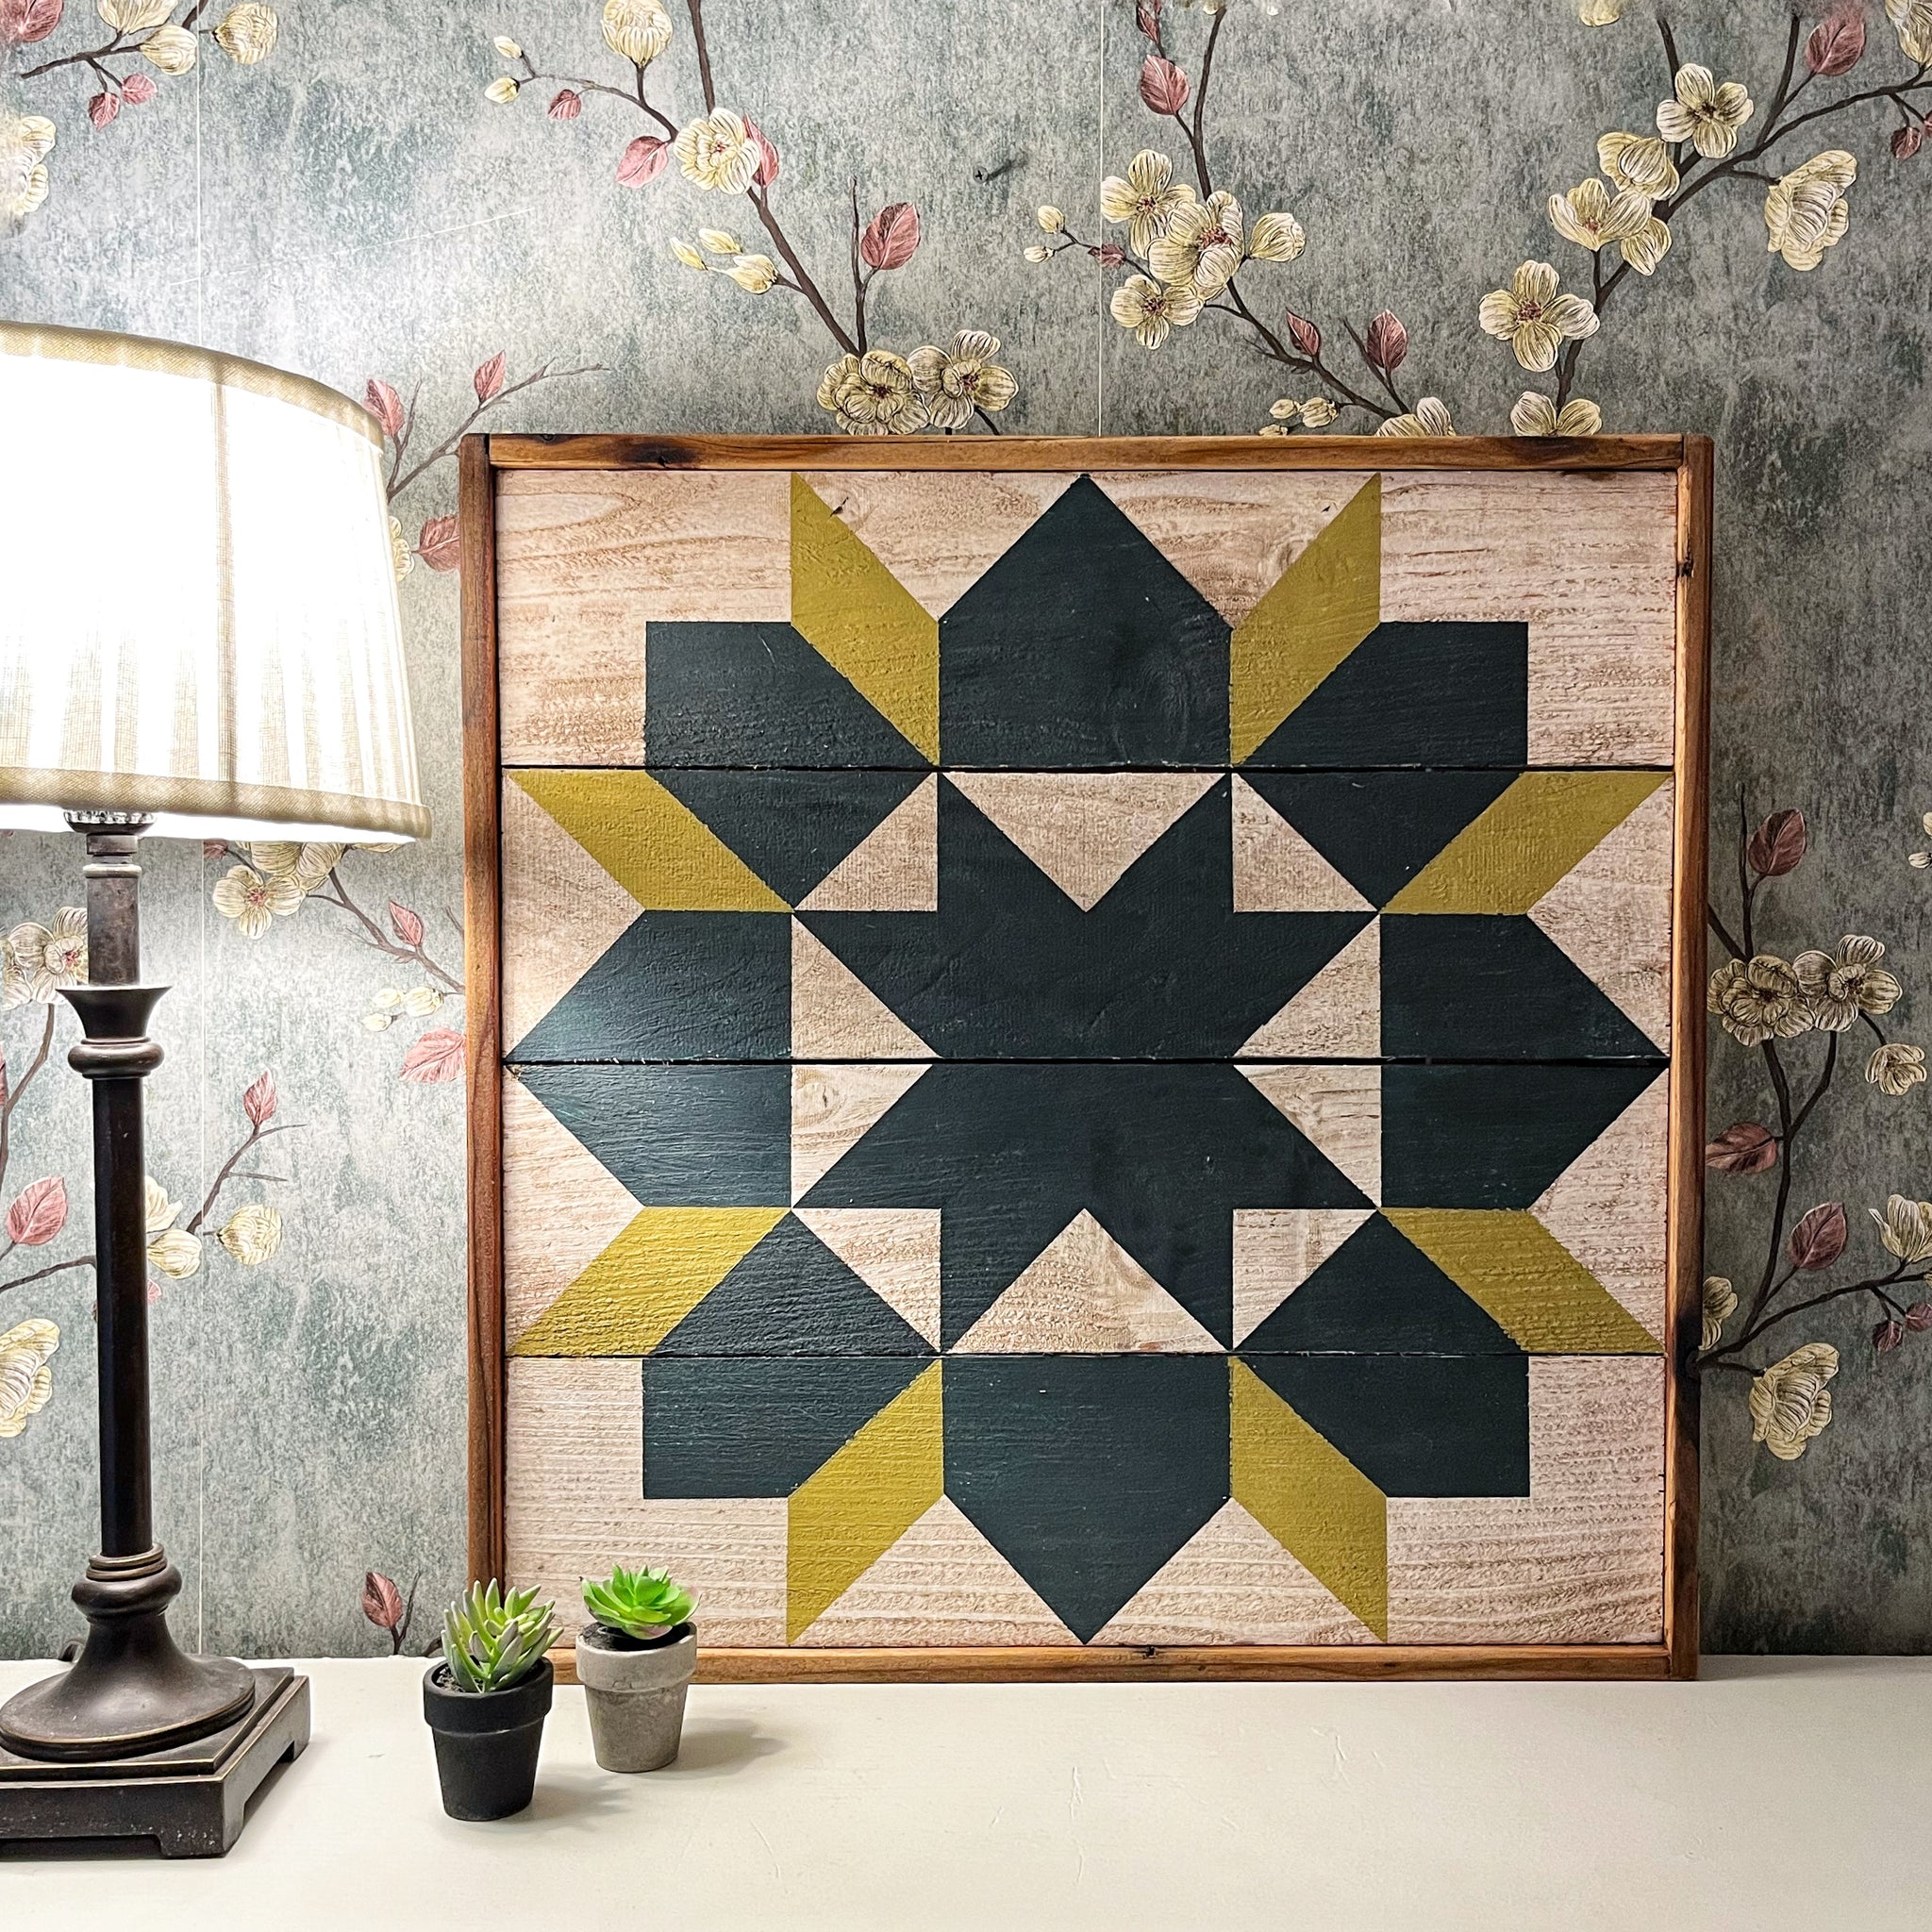 Swoony Star Barn Quilt